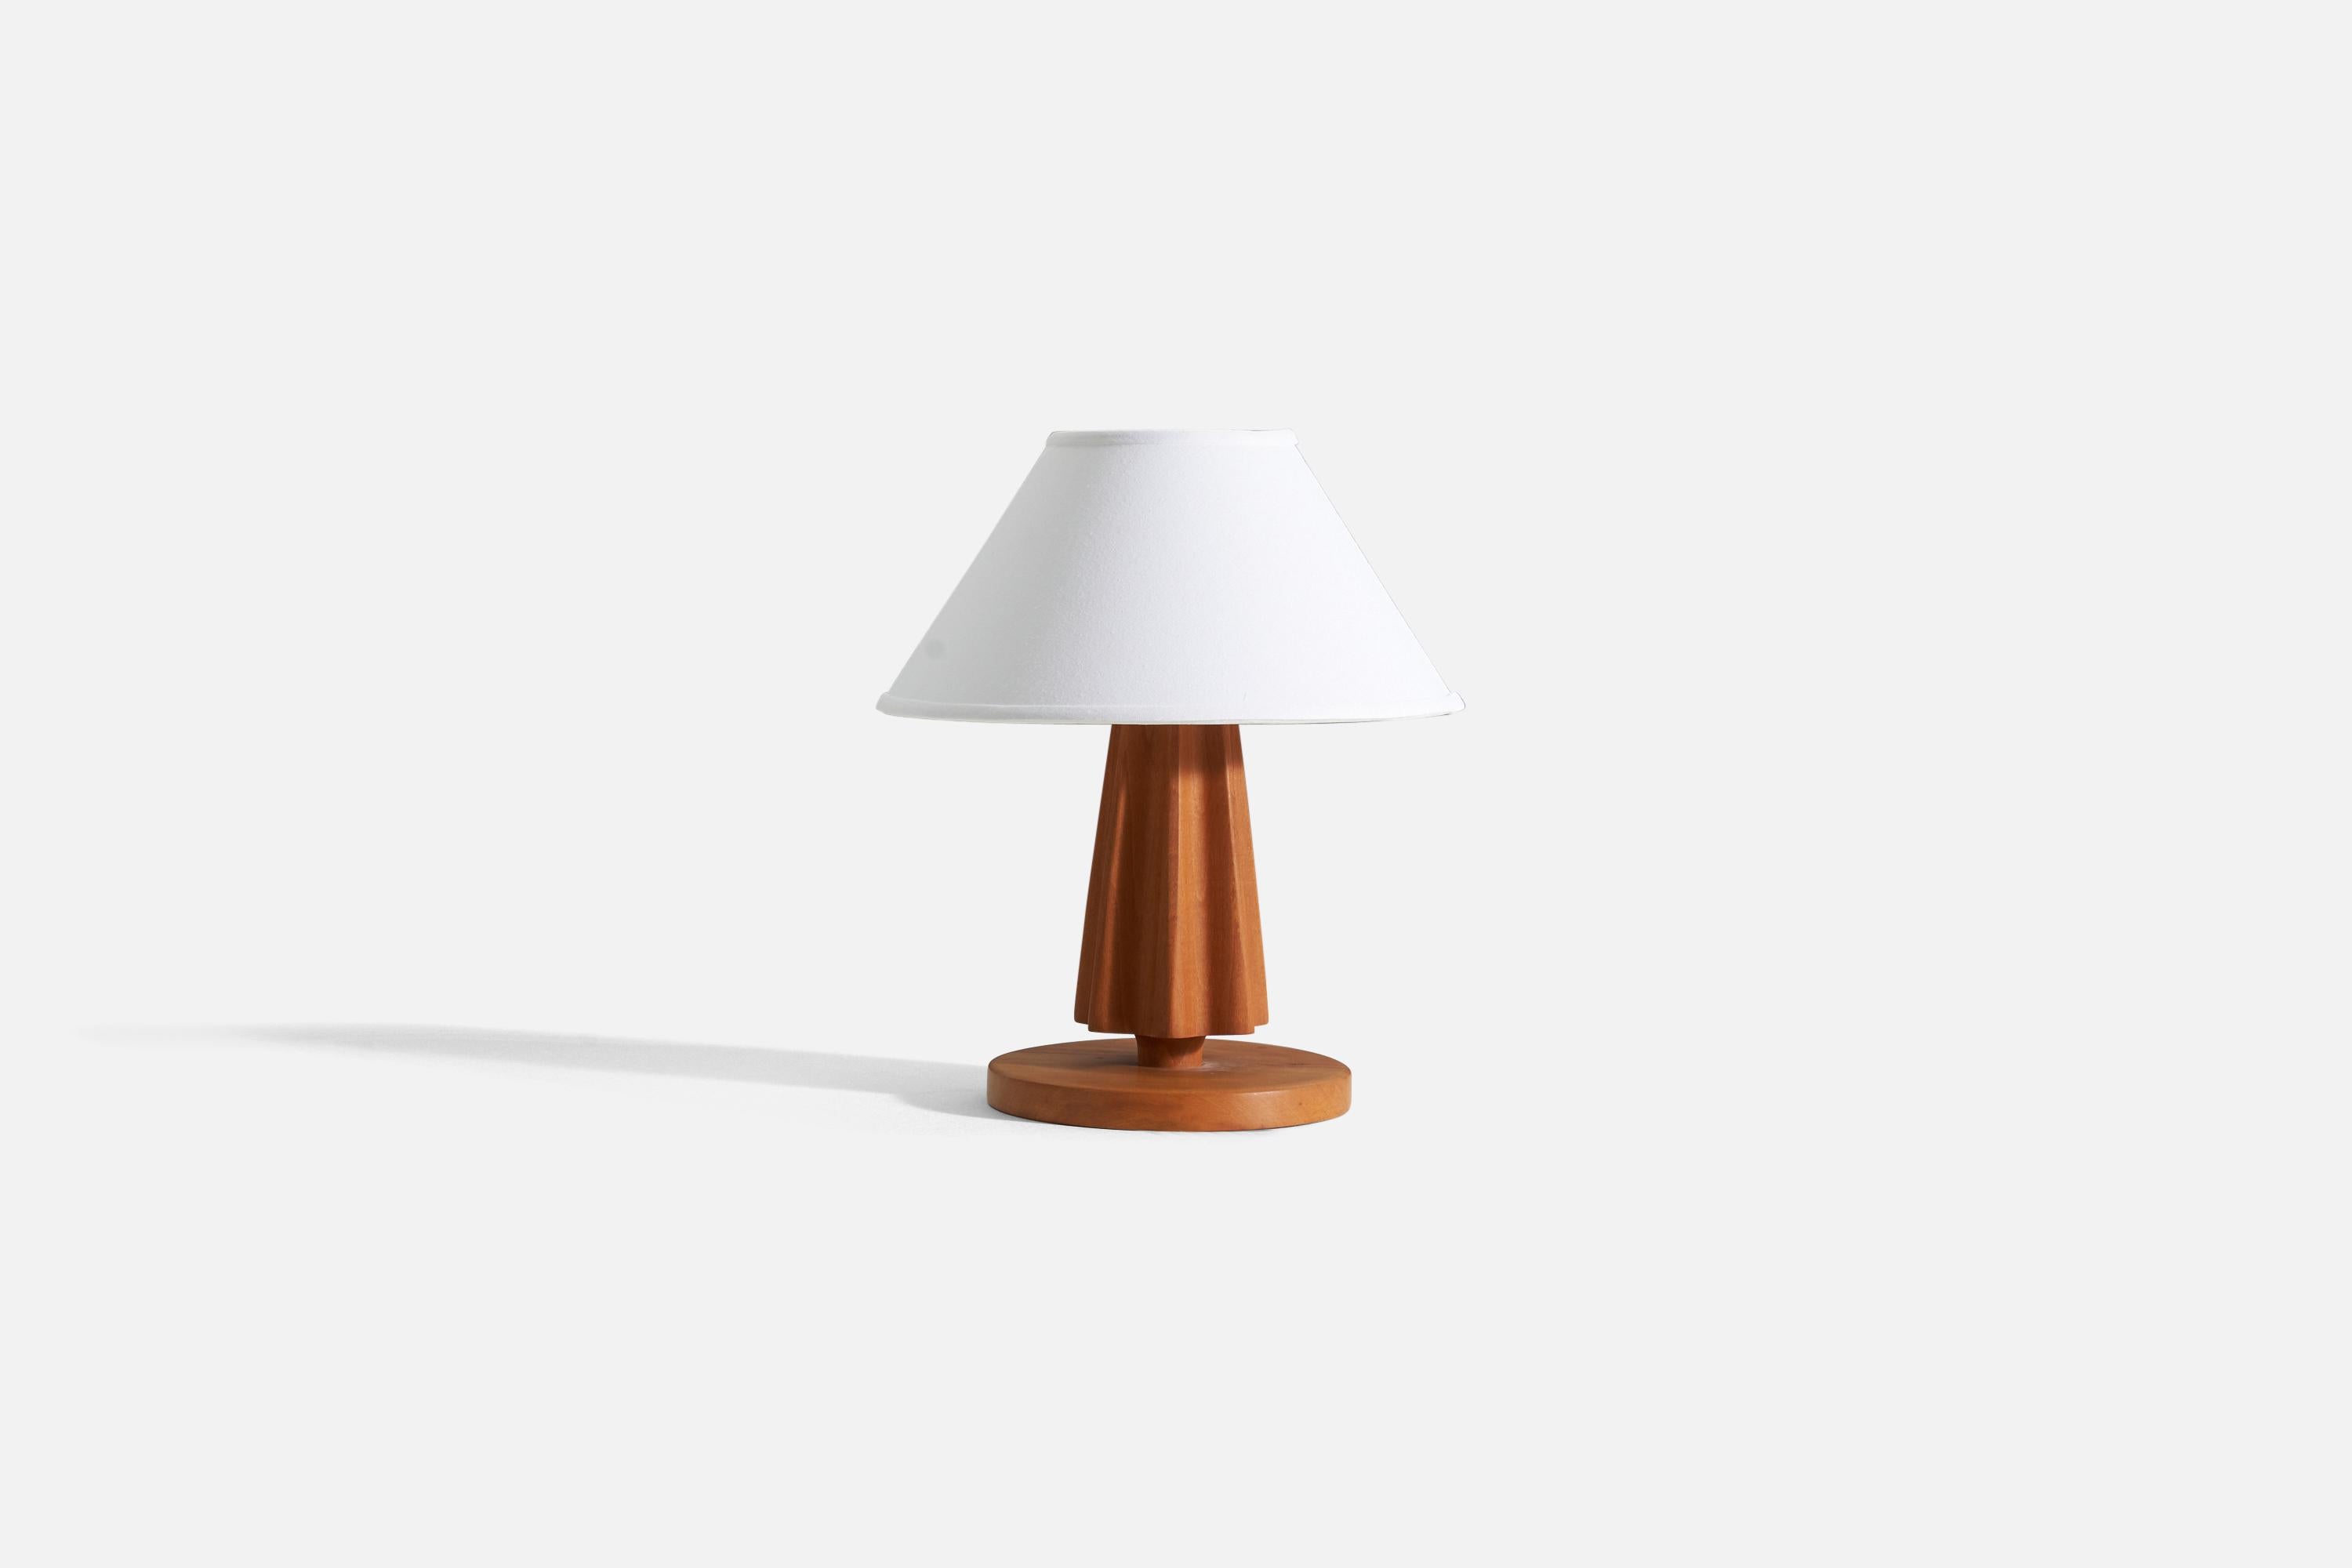 A solid wood table lamp, designed and produced in Sweden, c. 1960s. 

Sold without lampshade.

For reference:
Dimensions of lamp with shade: H 16.5” / W 14.5”
Dimensions of shade: top of shade diameter 6” / bottom of shade diameter 14.5” /